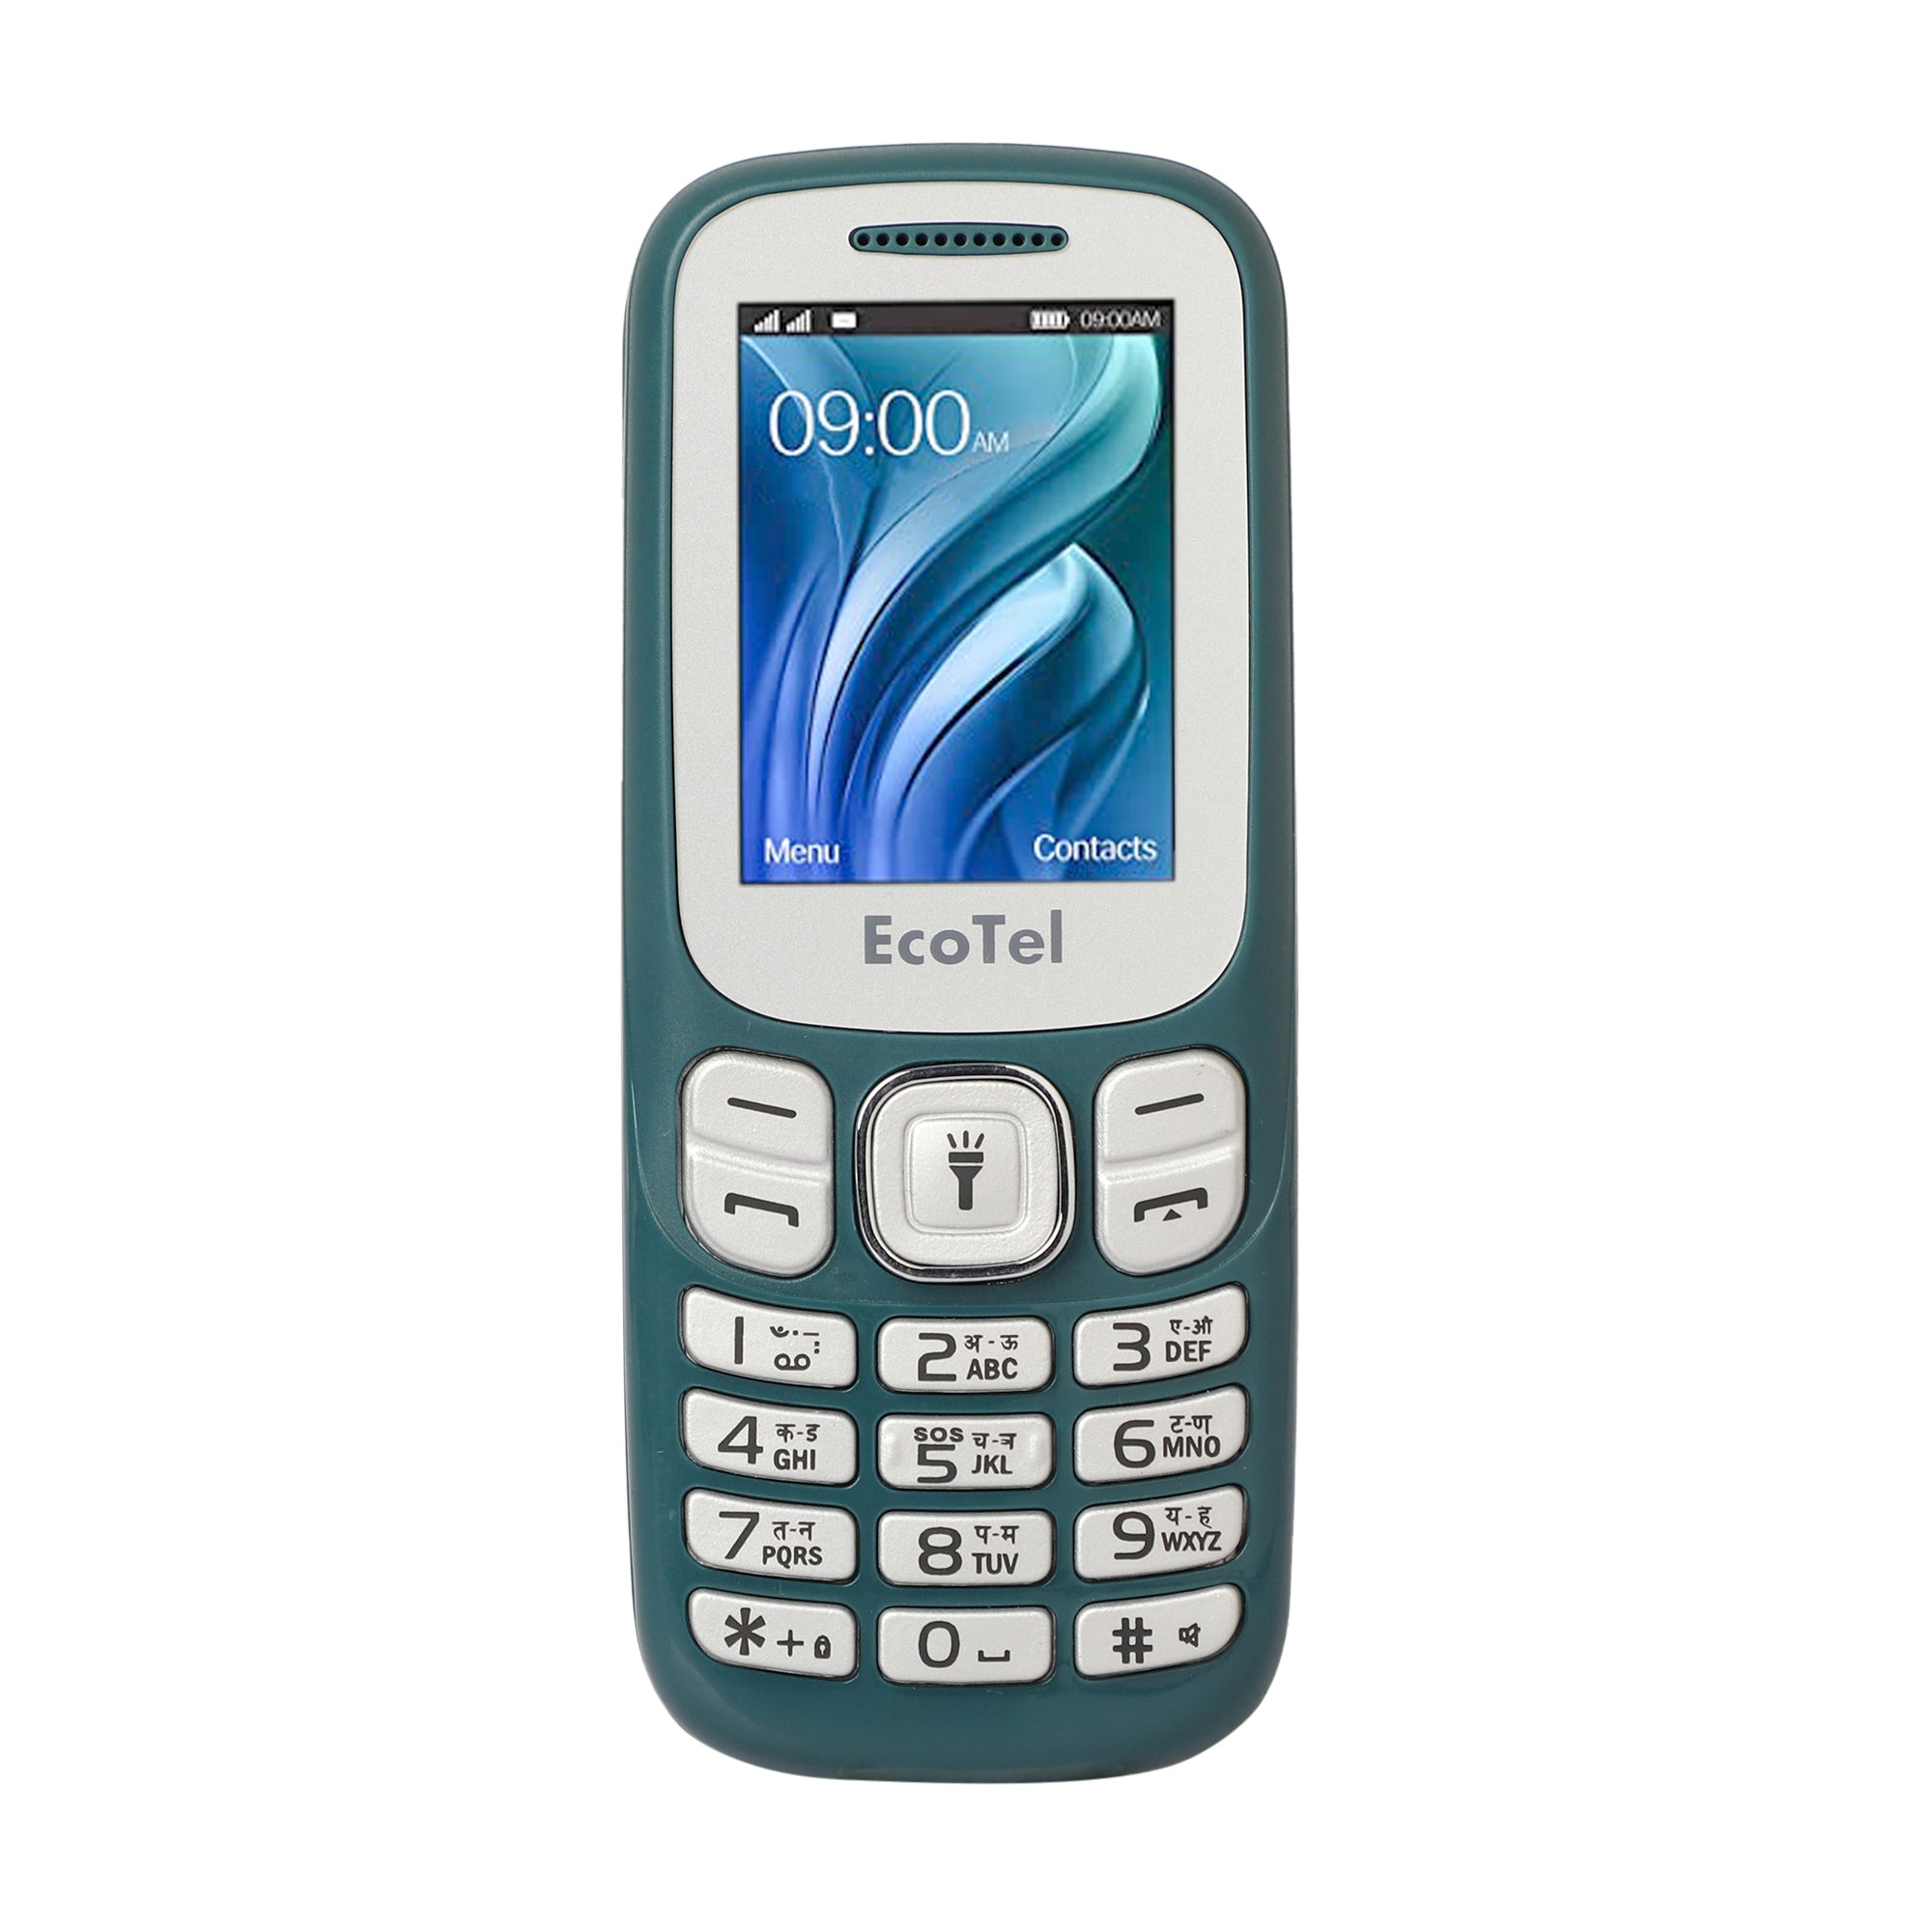 Ecotel E11 Mobile Phone Feature Phone with Dual SIM Card, Camera, Big Torch, Auto Call Recording (Green, 1.8 inch Big screen, 1050mAh Battery)